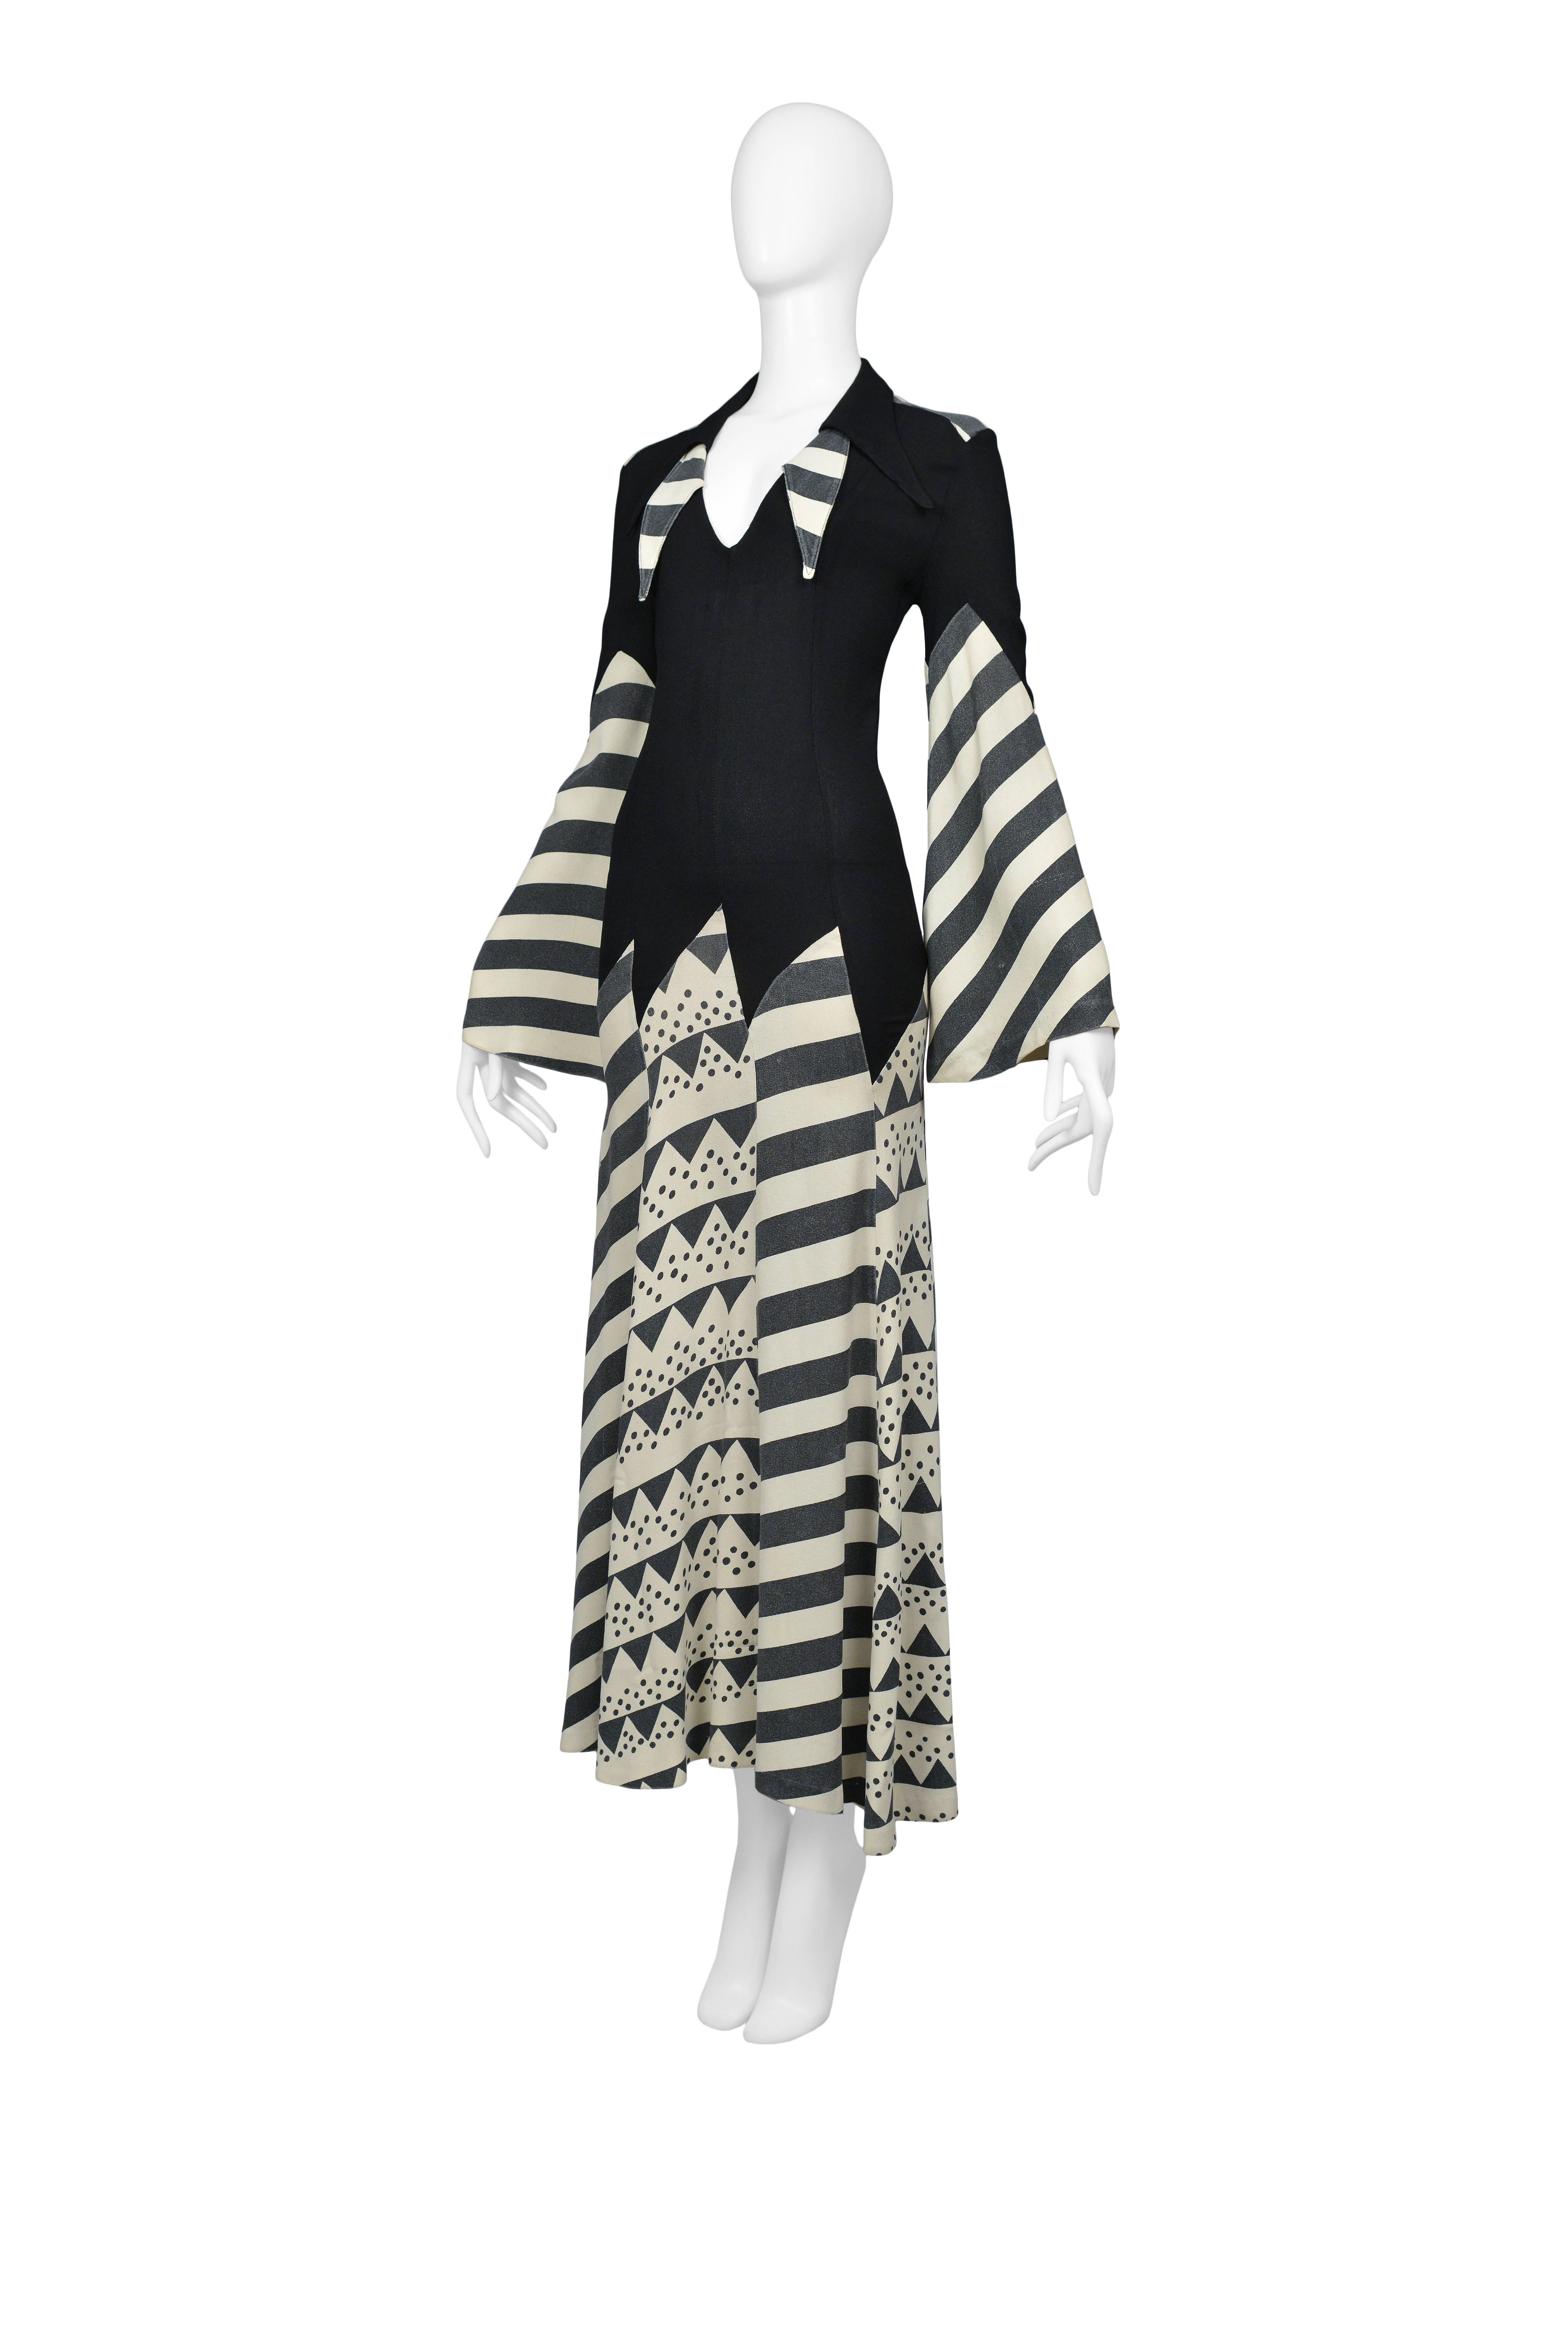 Iconic Ossie Clark Celia Birtwell Print Gown In Excellent Condition In Los Angeles, CA